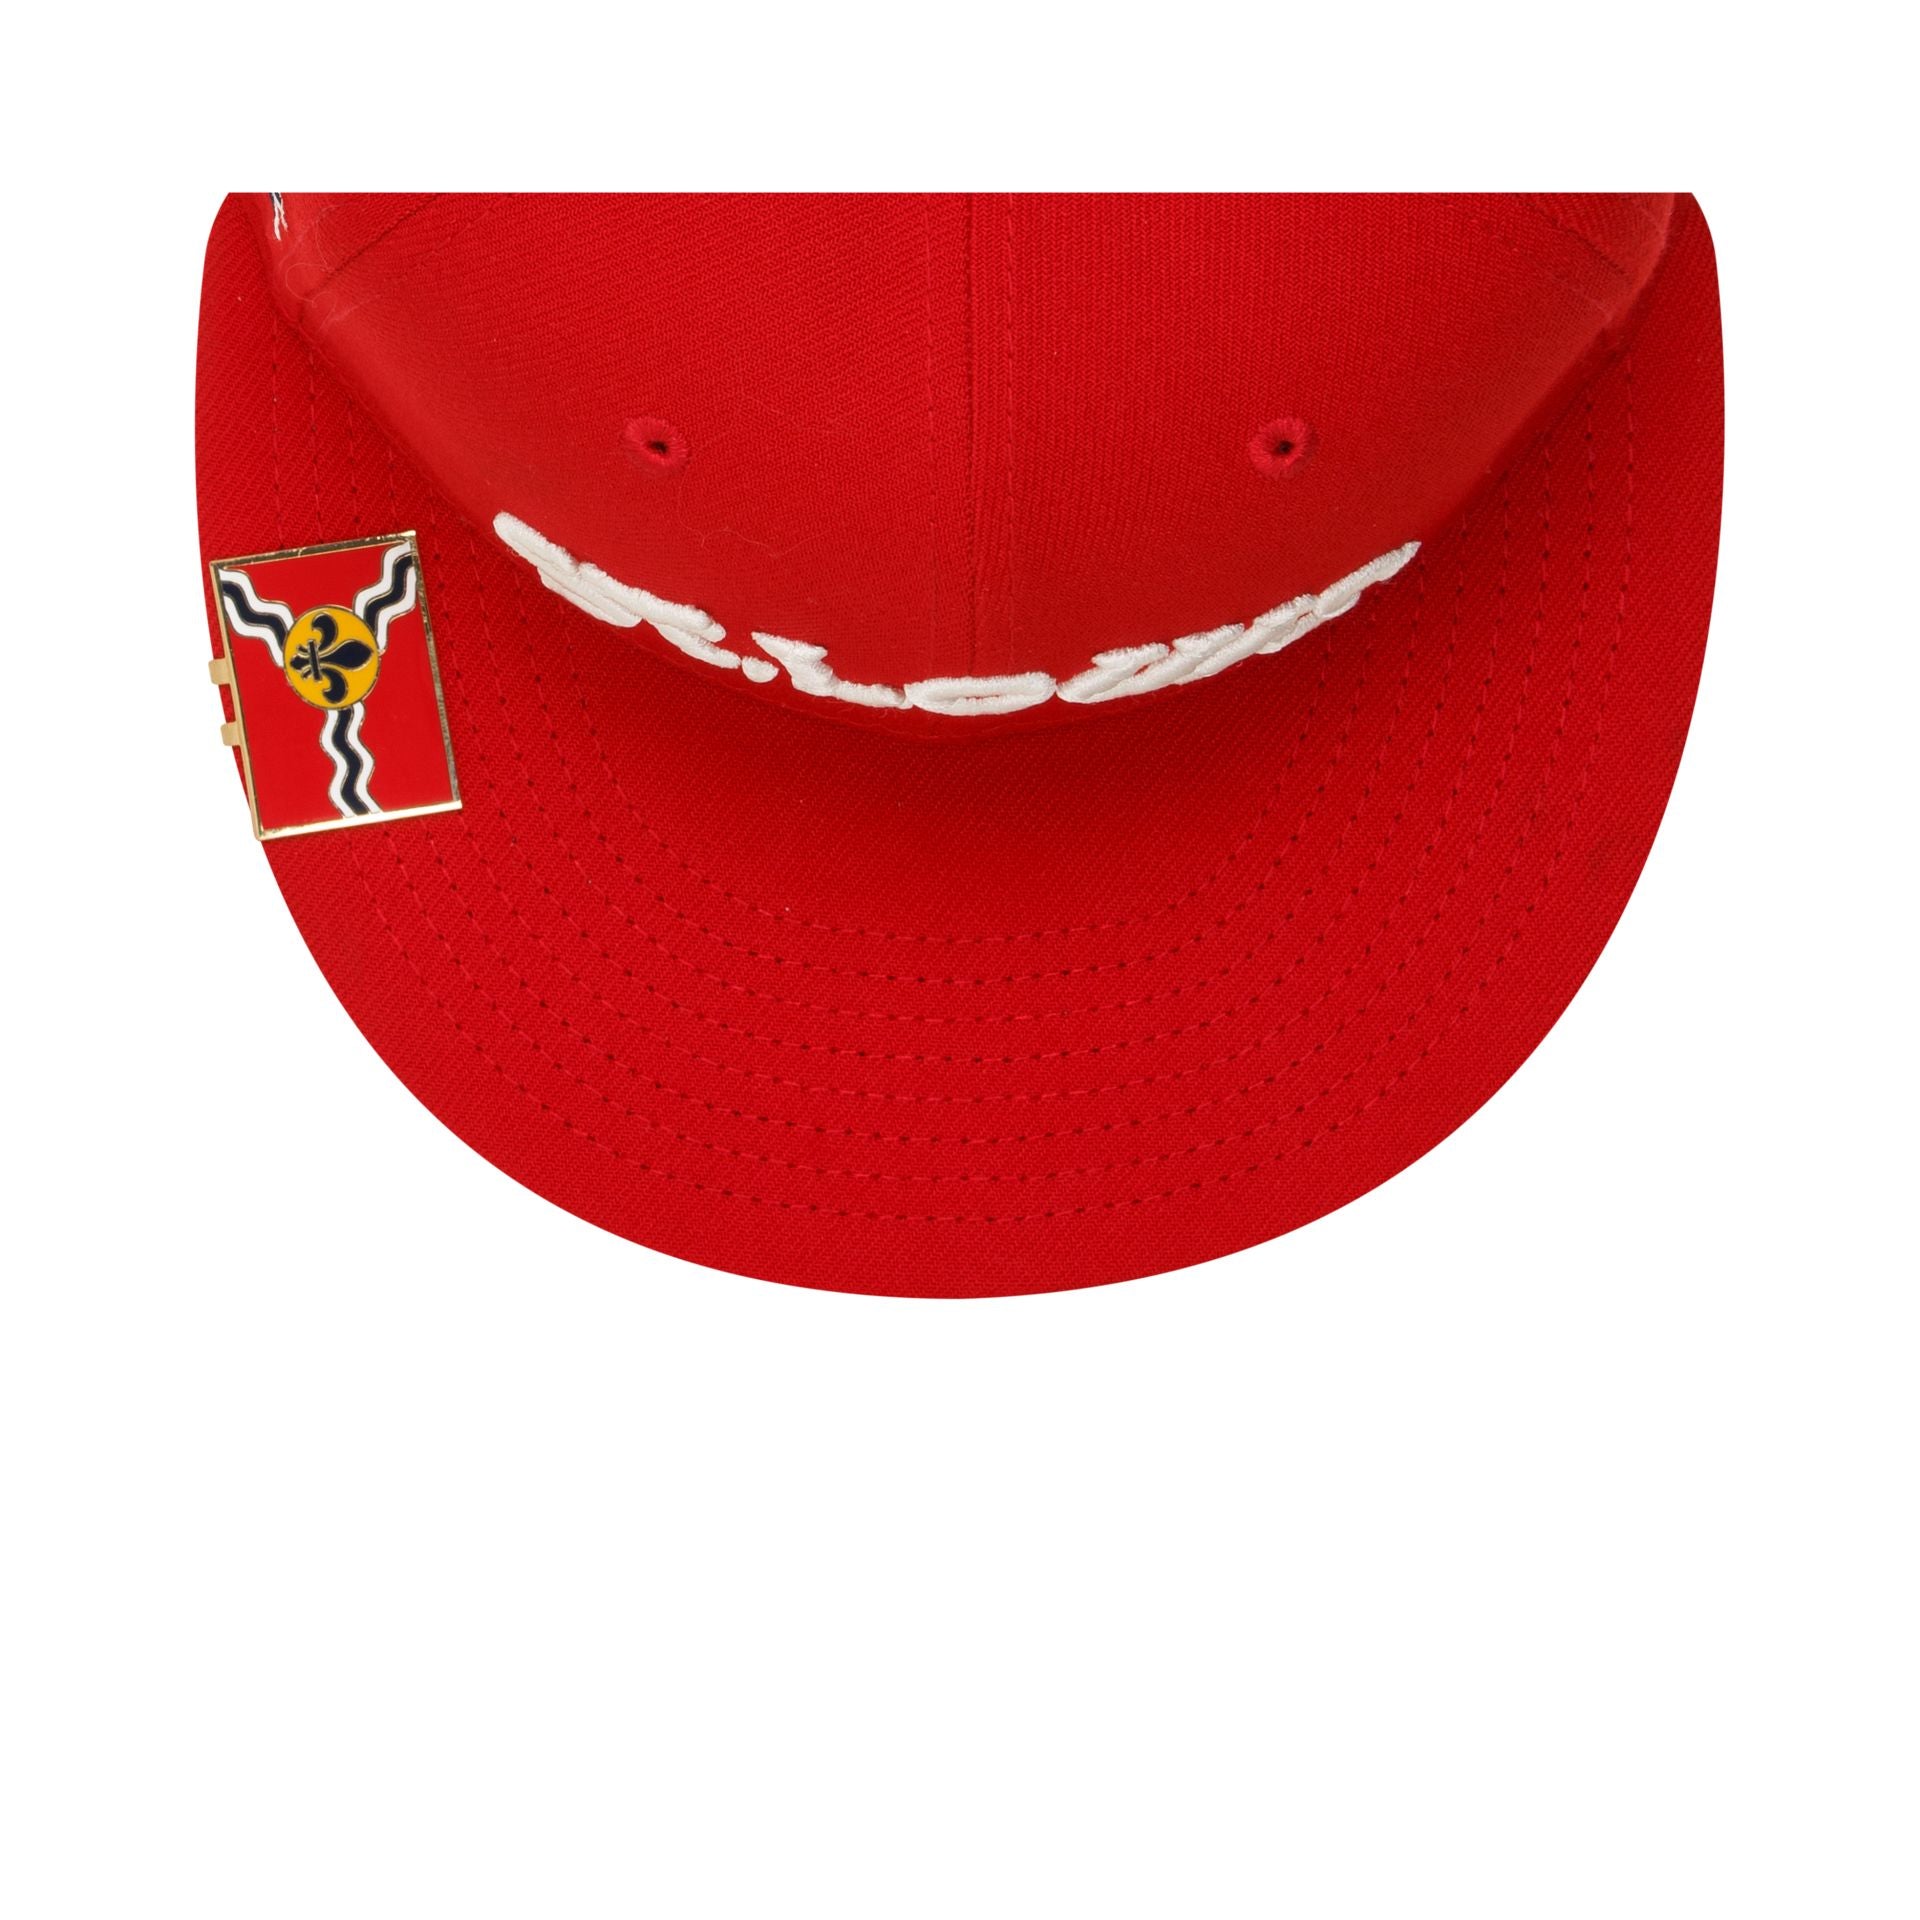 St. Louis Cardinals City Flag 59FIFTY Fitted Hat, Red - Size: 7 7/8, MLB by New Era